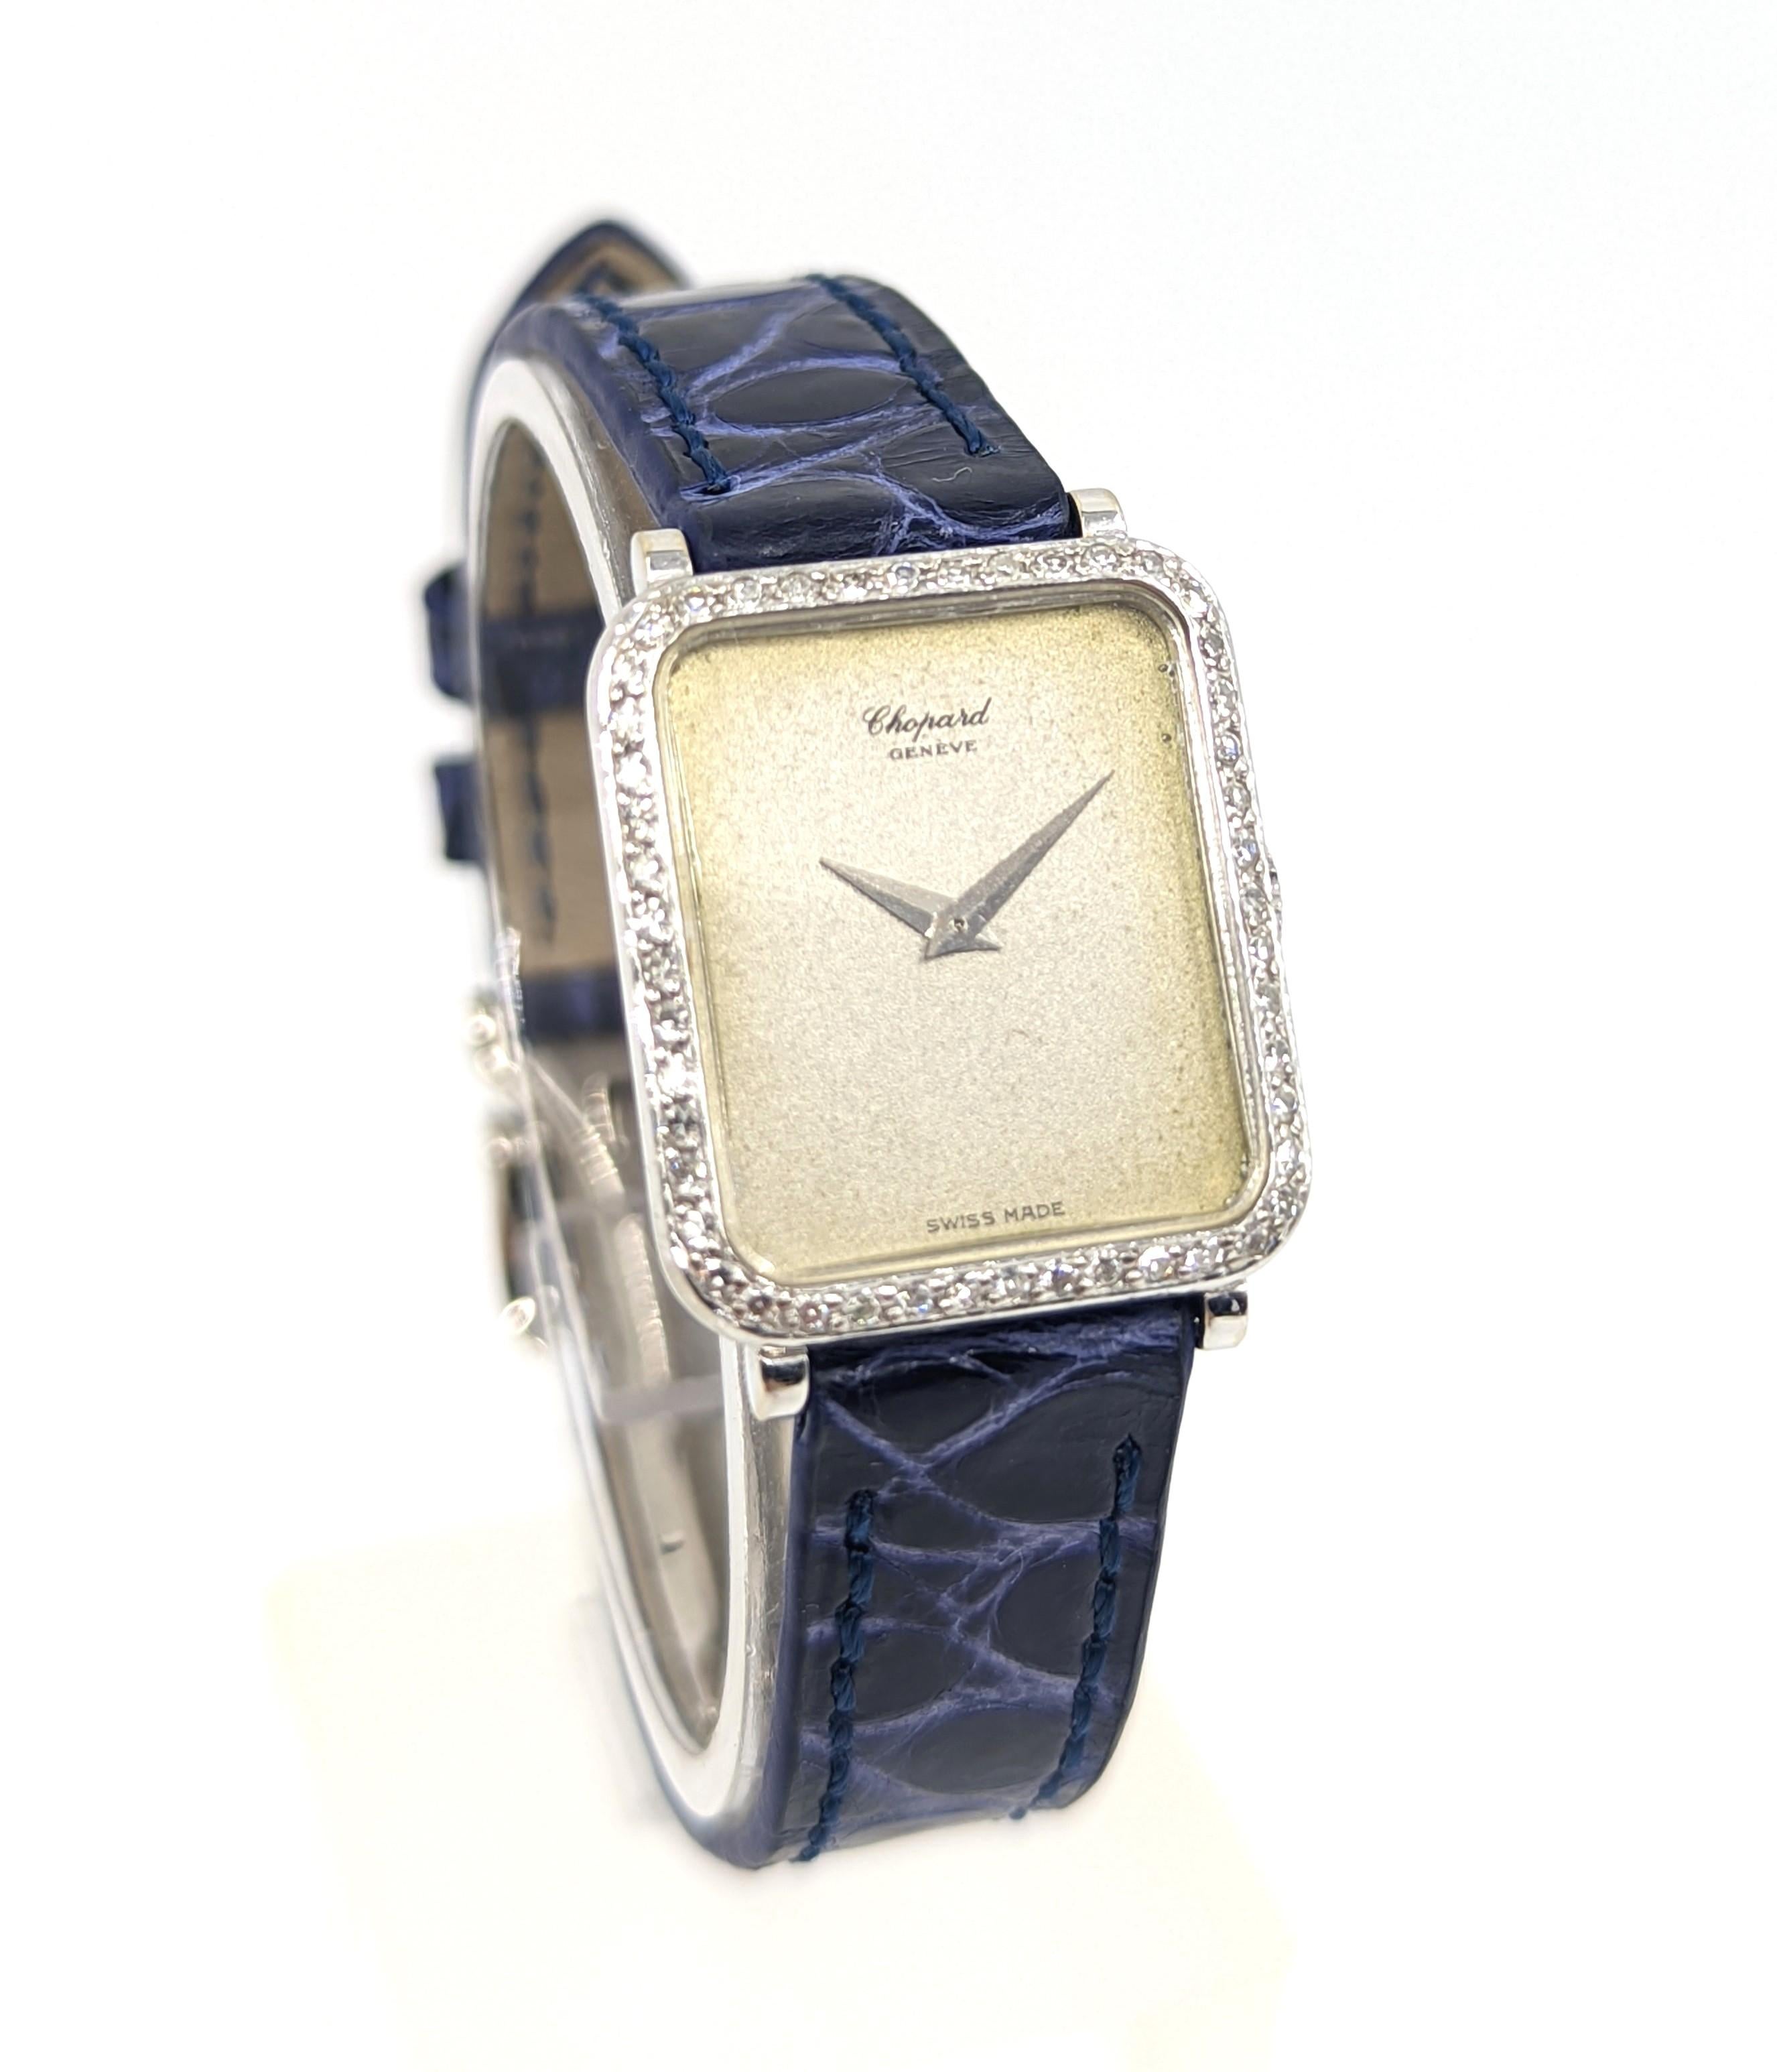 A beautiful vintage Chopard 18K solid white gold wristwatch (reference 8/6495), with a full factory diamond bezel on a blue croco leather band, and factory paired with a Jaeger LeCoultre JLC 18K white gold deployment clasp. Comes with original sales